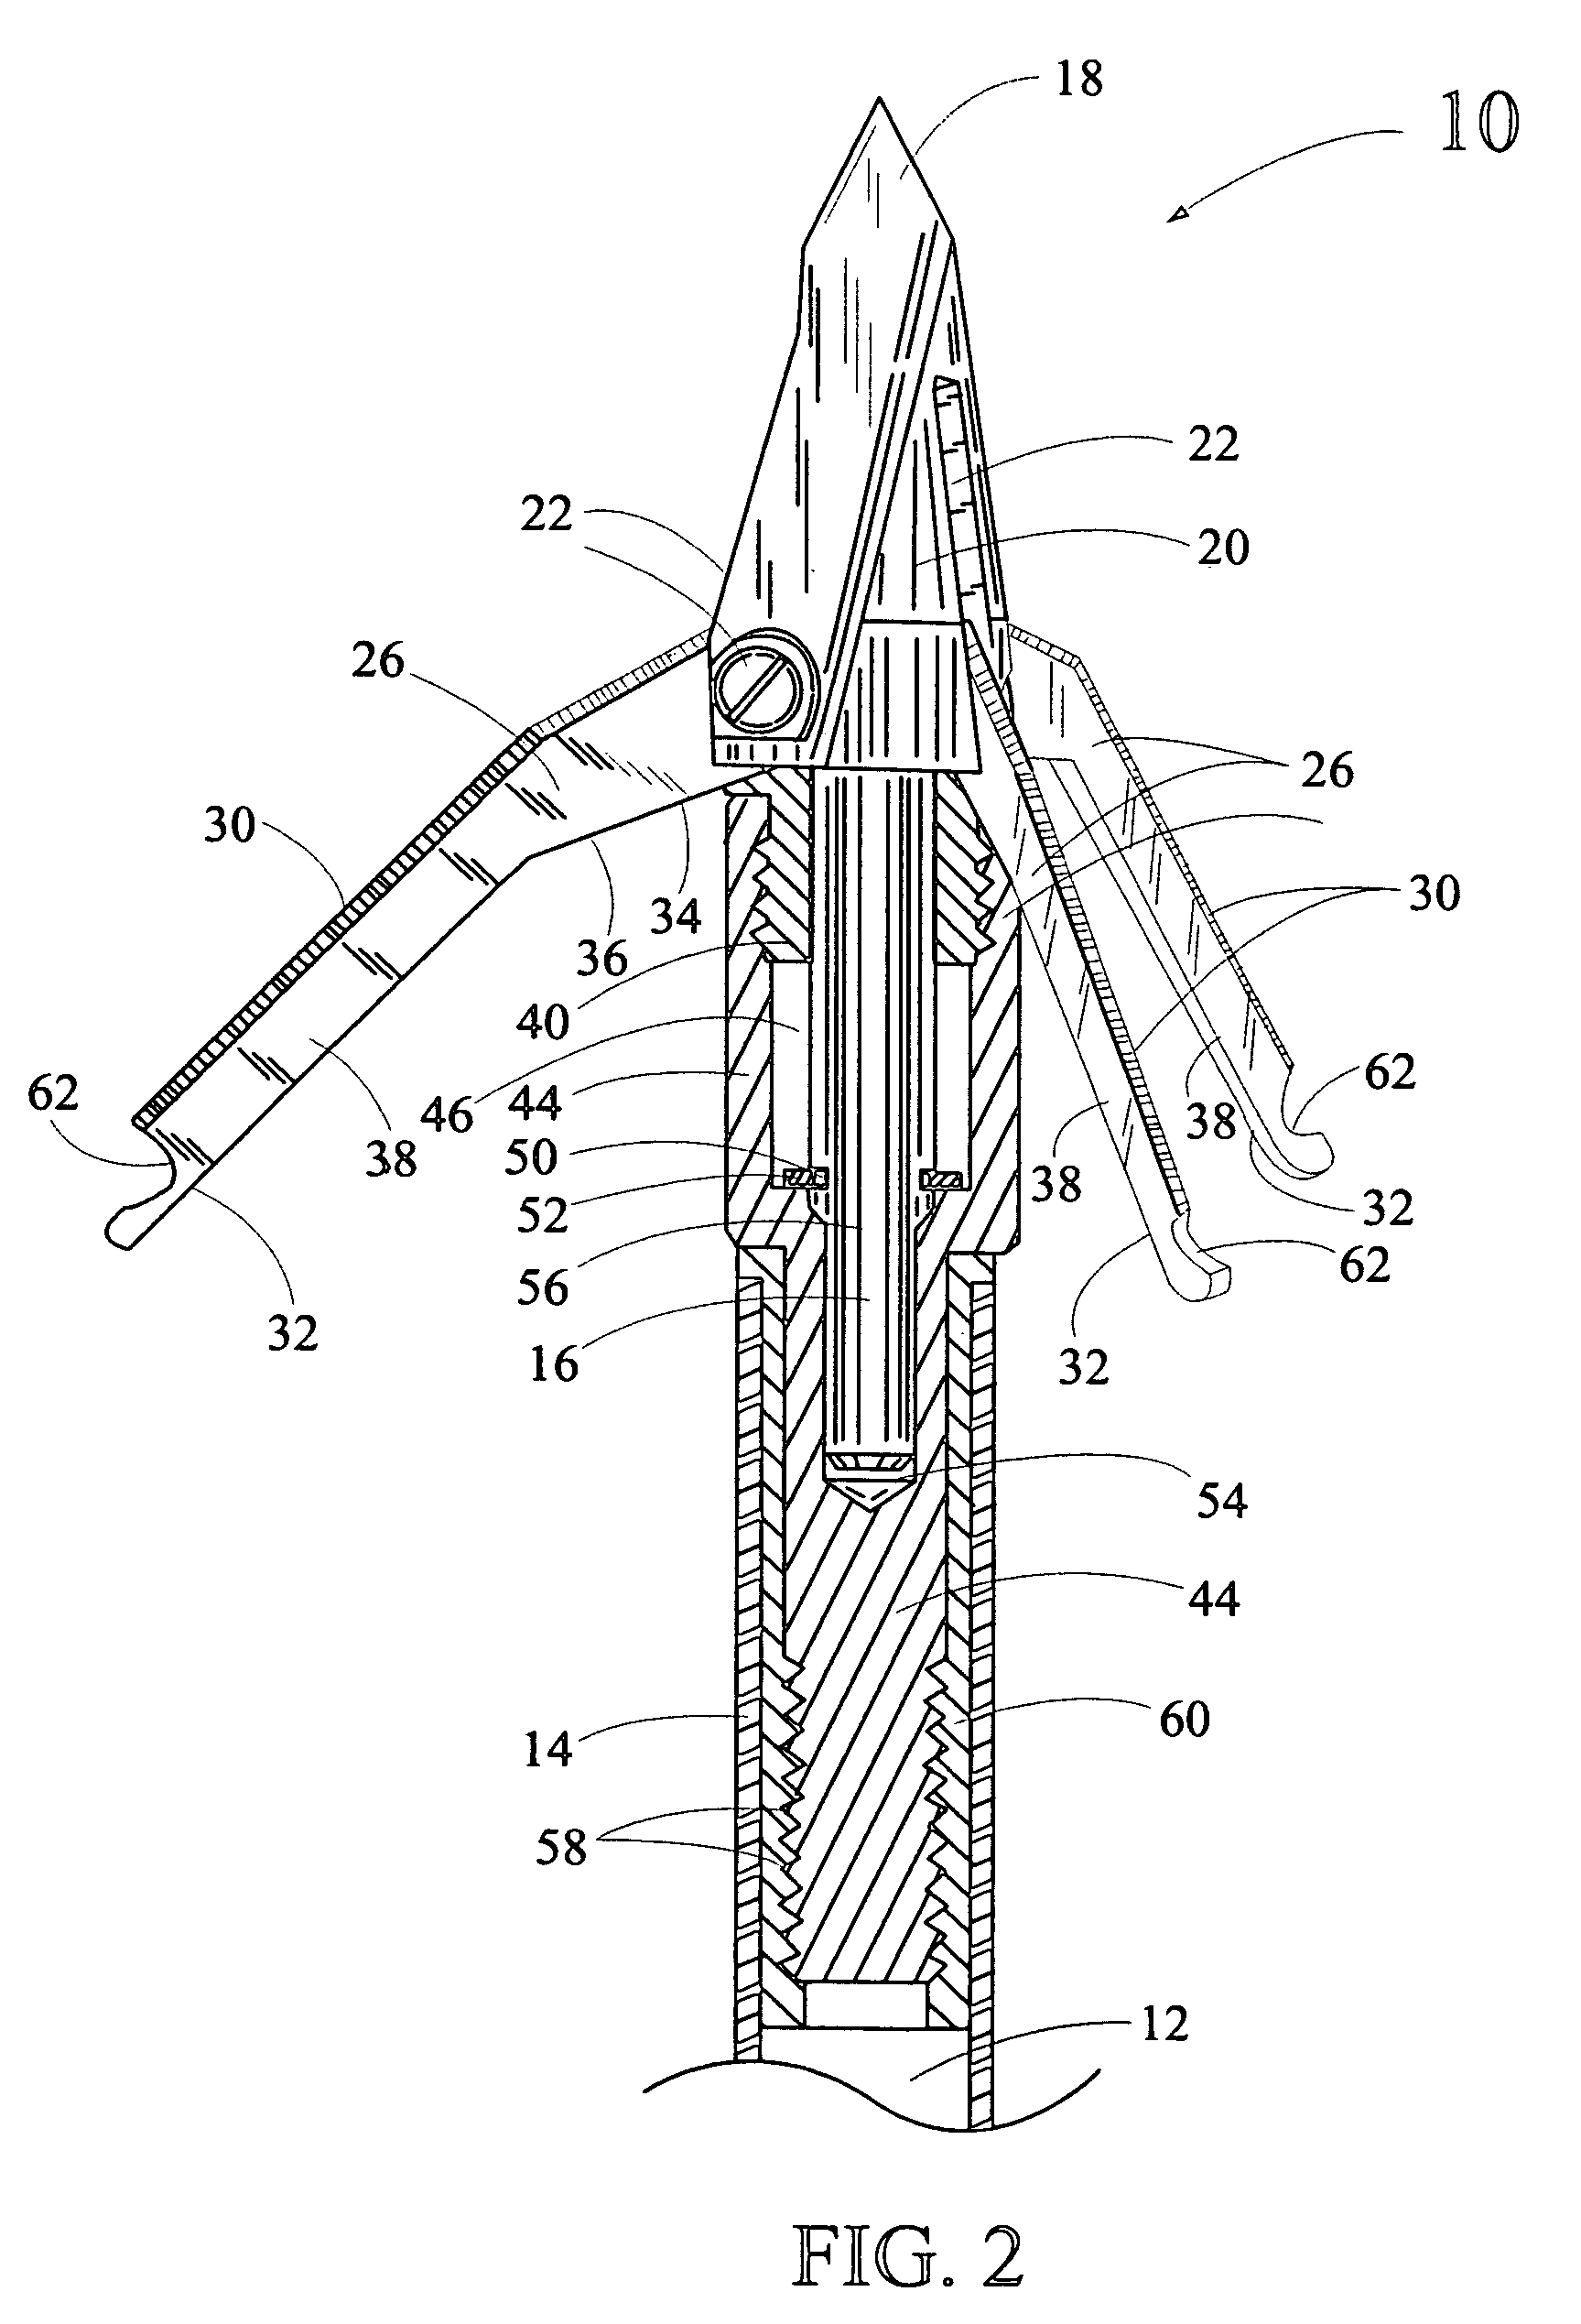 Expandable arrow broadhead for attachment to one end of an arrow shaft